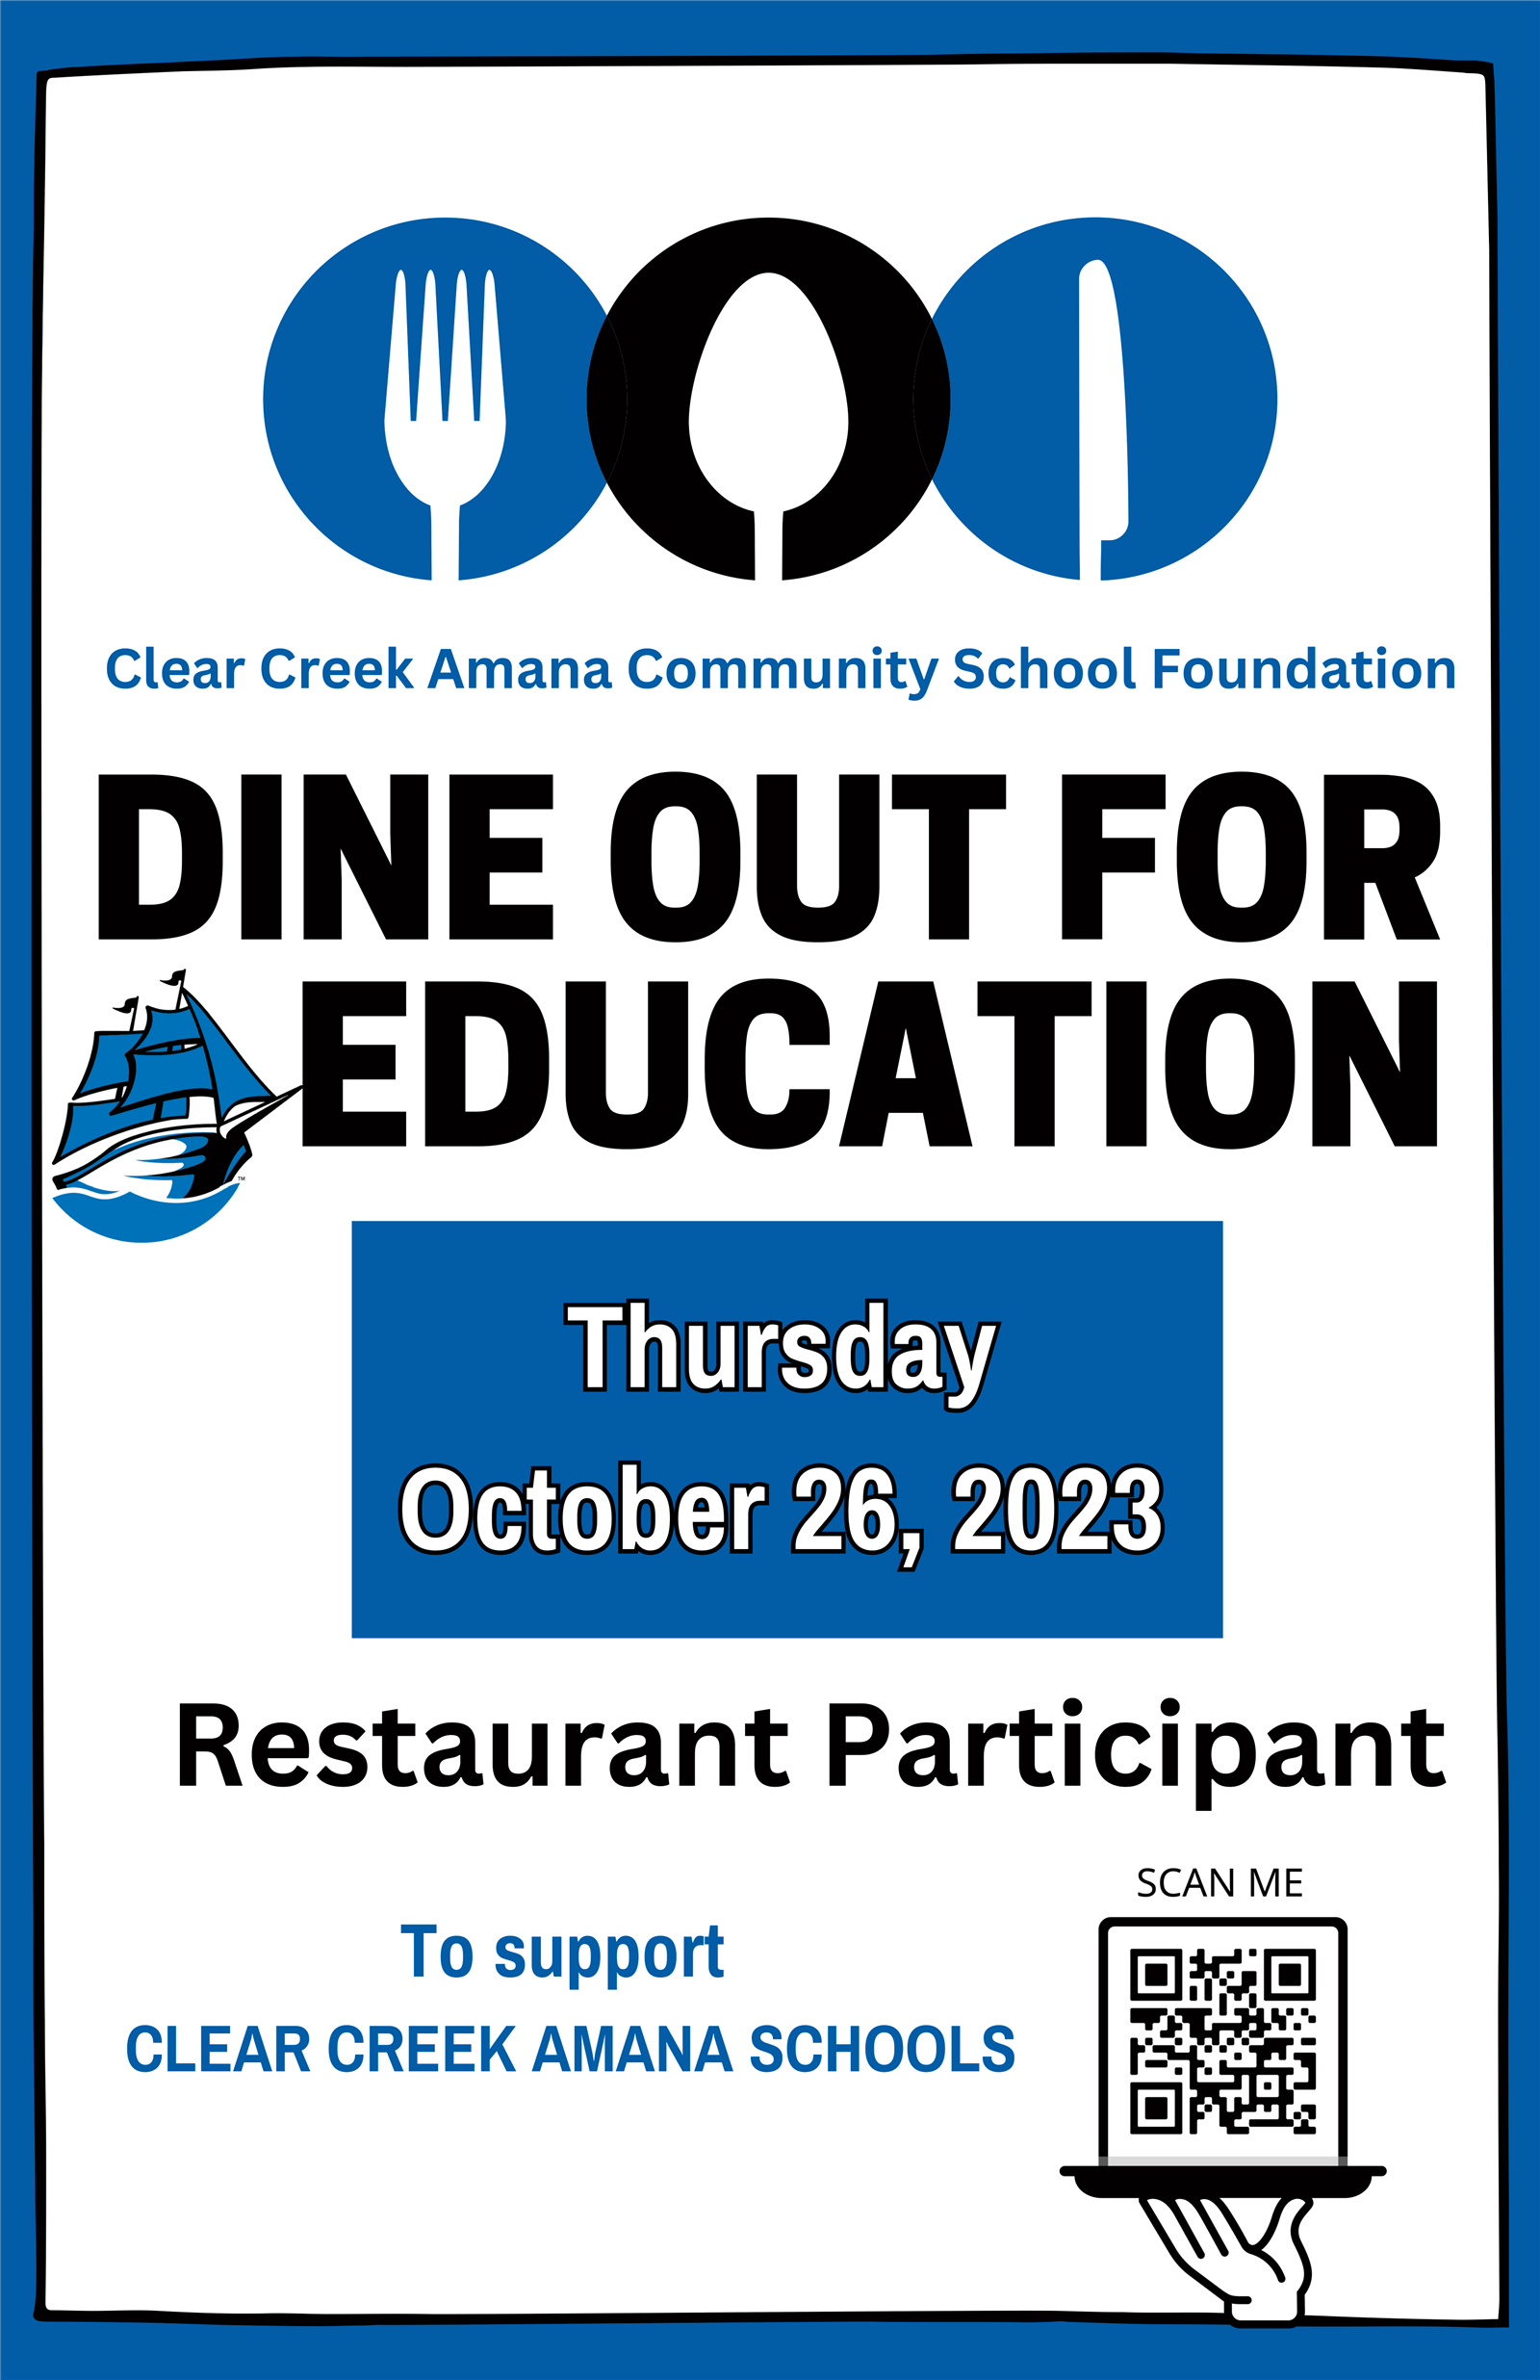 dine out for education poster